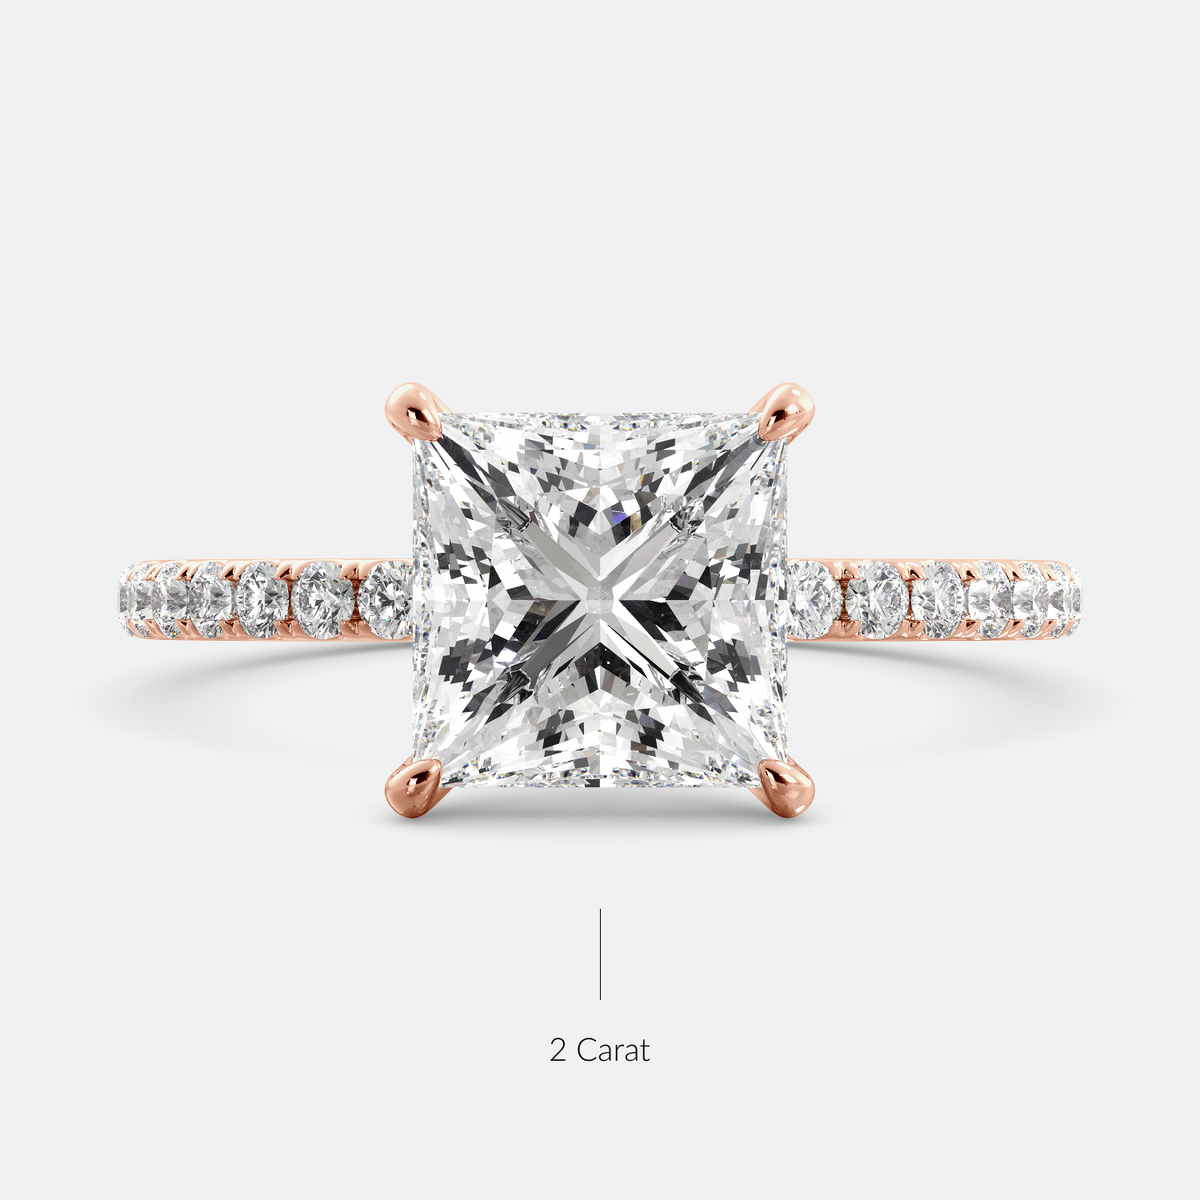 A close-up of a rose gold cushion solitaire lab-grown diamond ring with an eternity band. The lab-grown diamond is a climate -positive diamond, created by using carbon from the atmosphere. The ring is set with a 1-carat cushion-cut diamond in the center, surrounded by a row of smaller diamonds on the band. The ring is available in a variety of sizes and starts at \\$6,400.00.